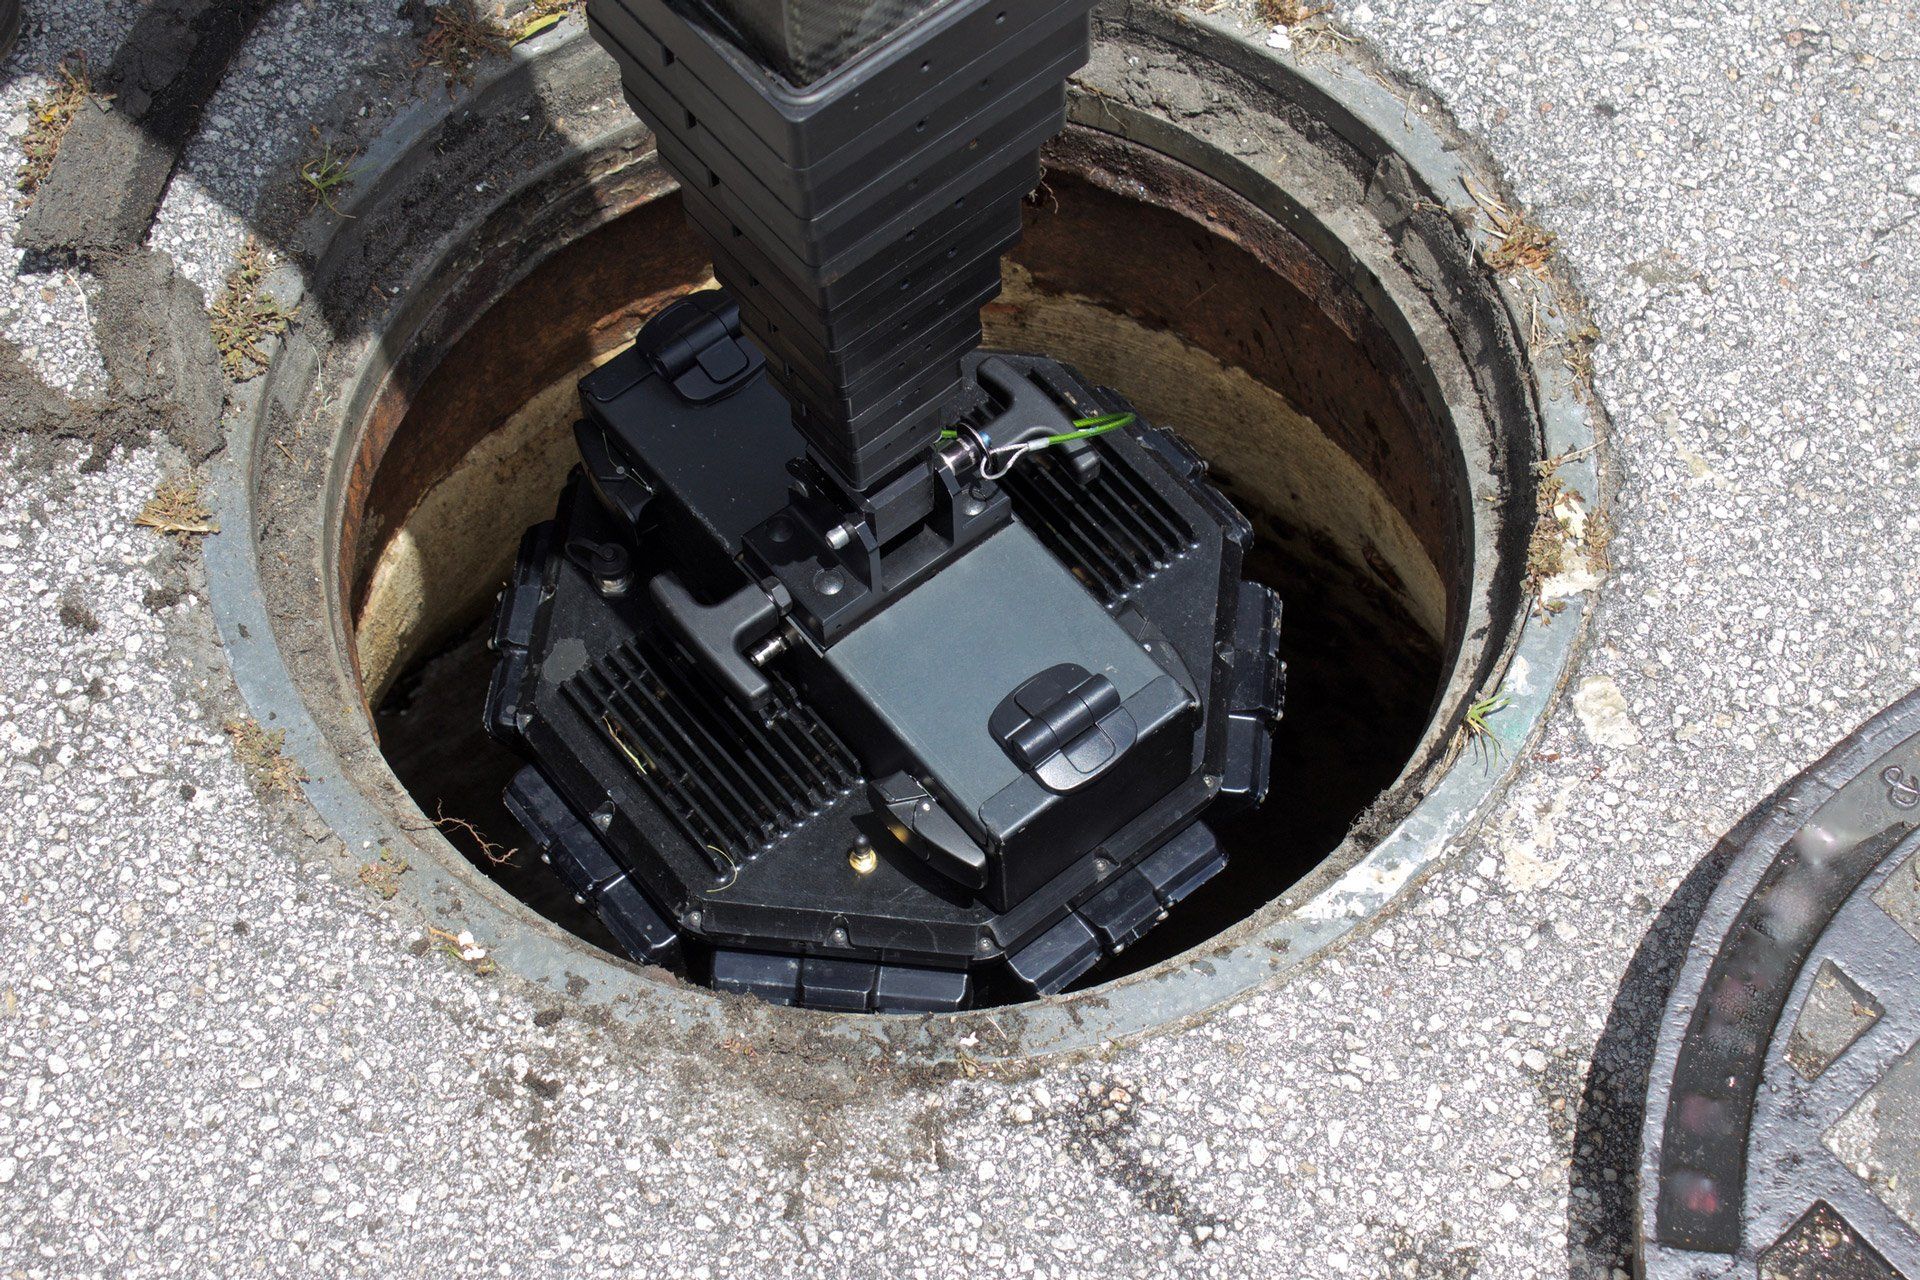 Sewer scope and camera entering sewer